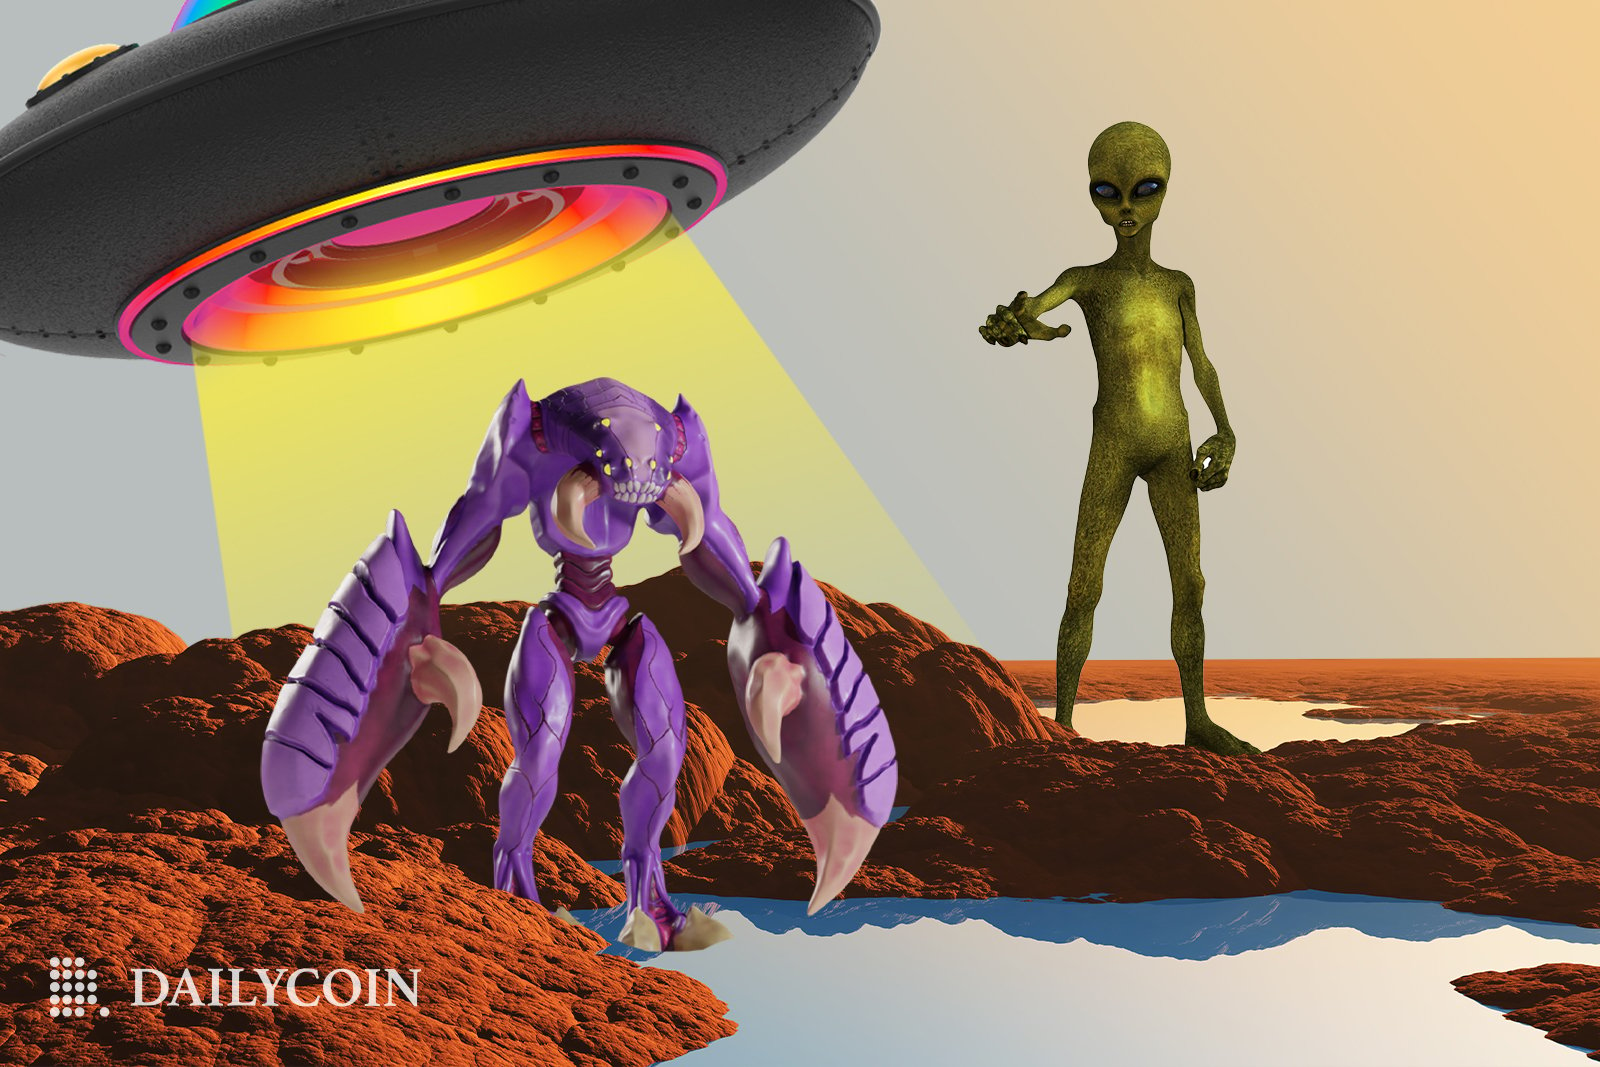 Purple alien with scissor hands emerges from a UFO aircraft with yellow shining light while another green alien stands nearby.